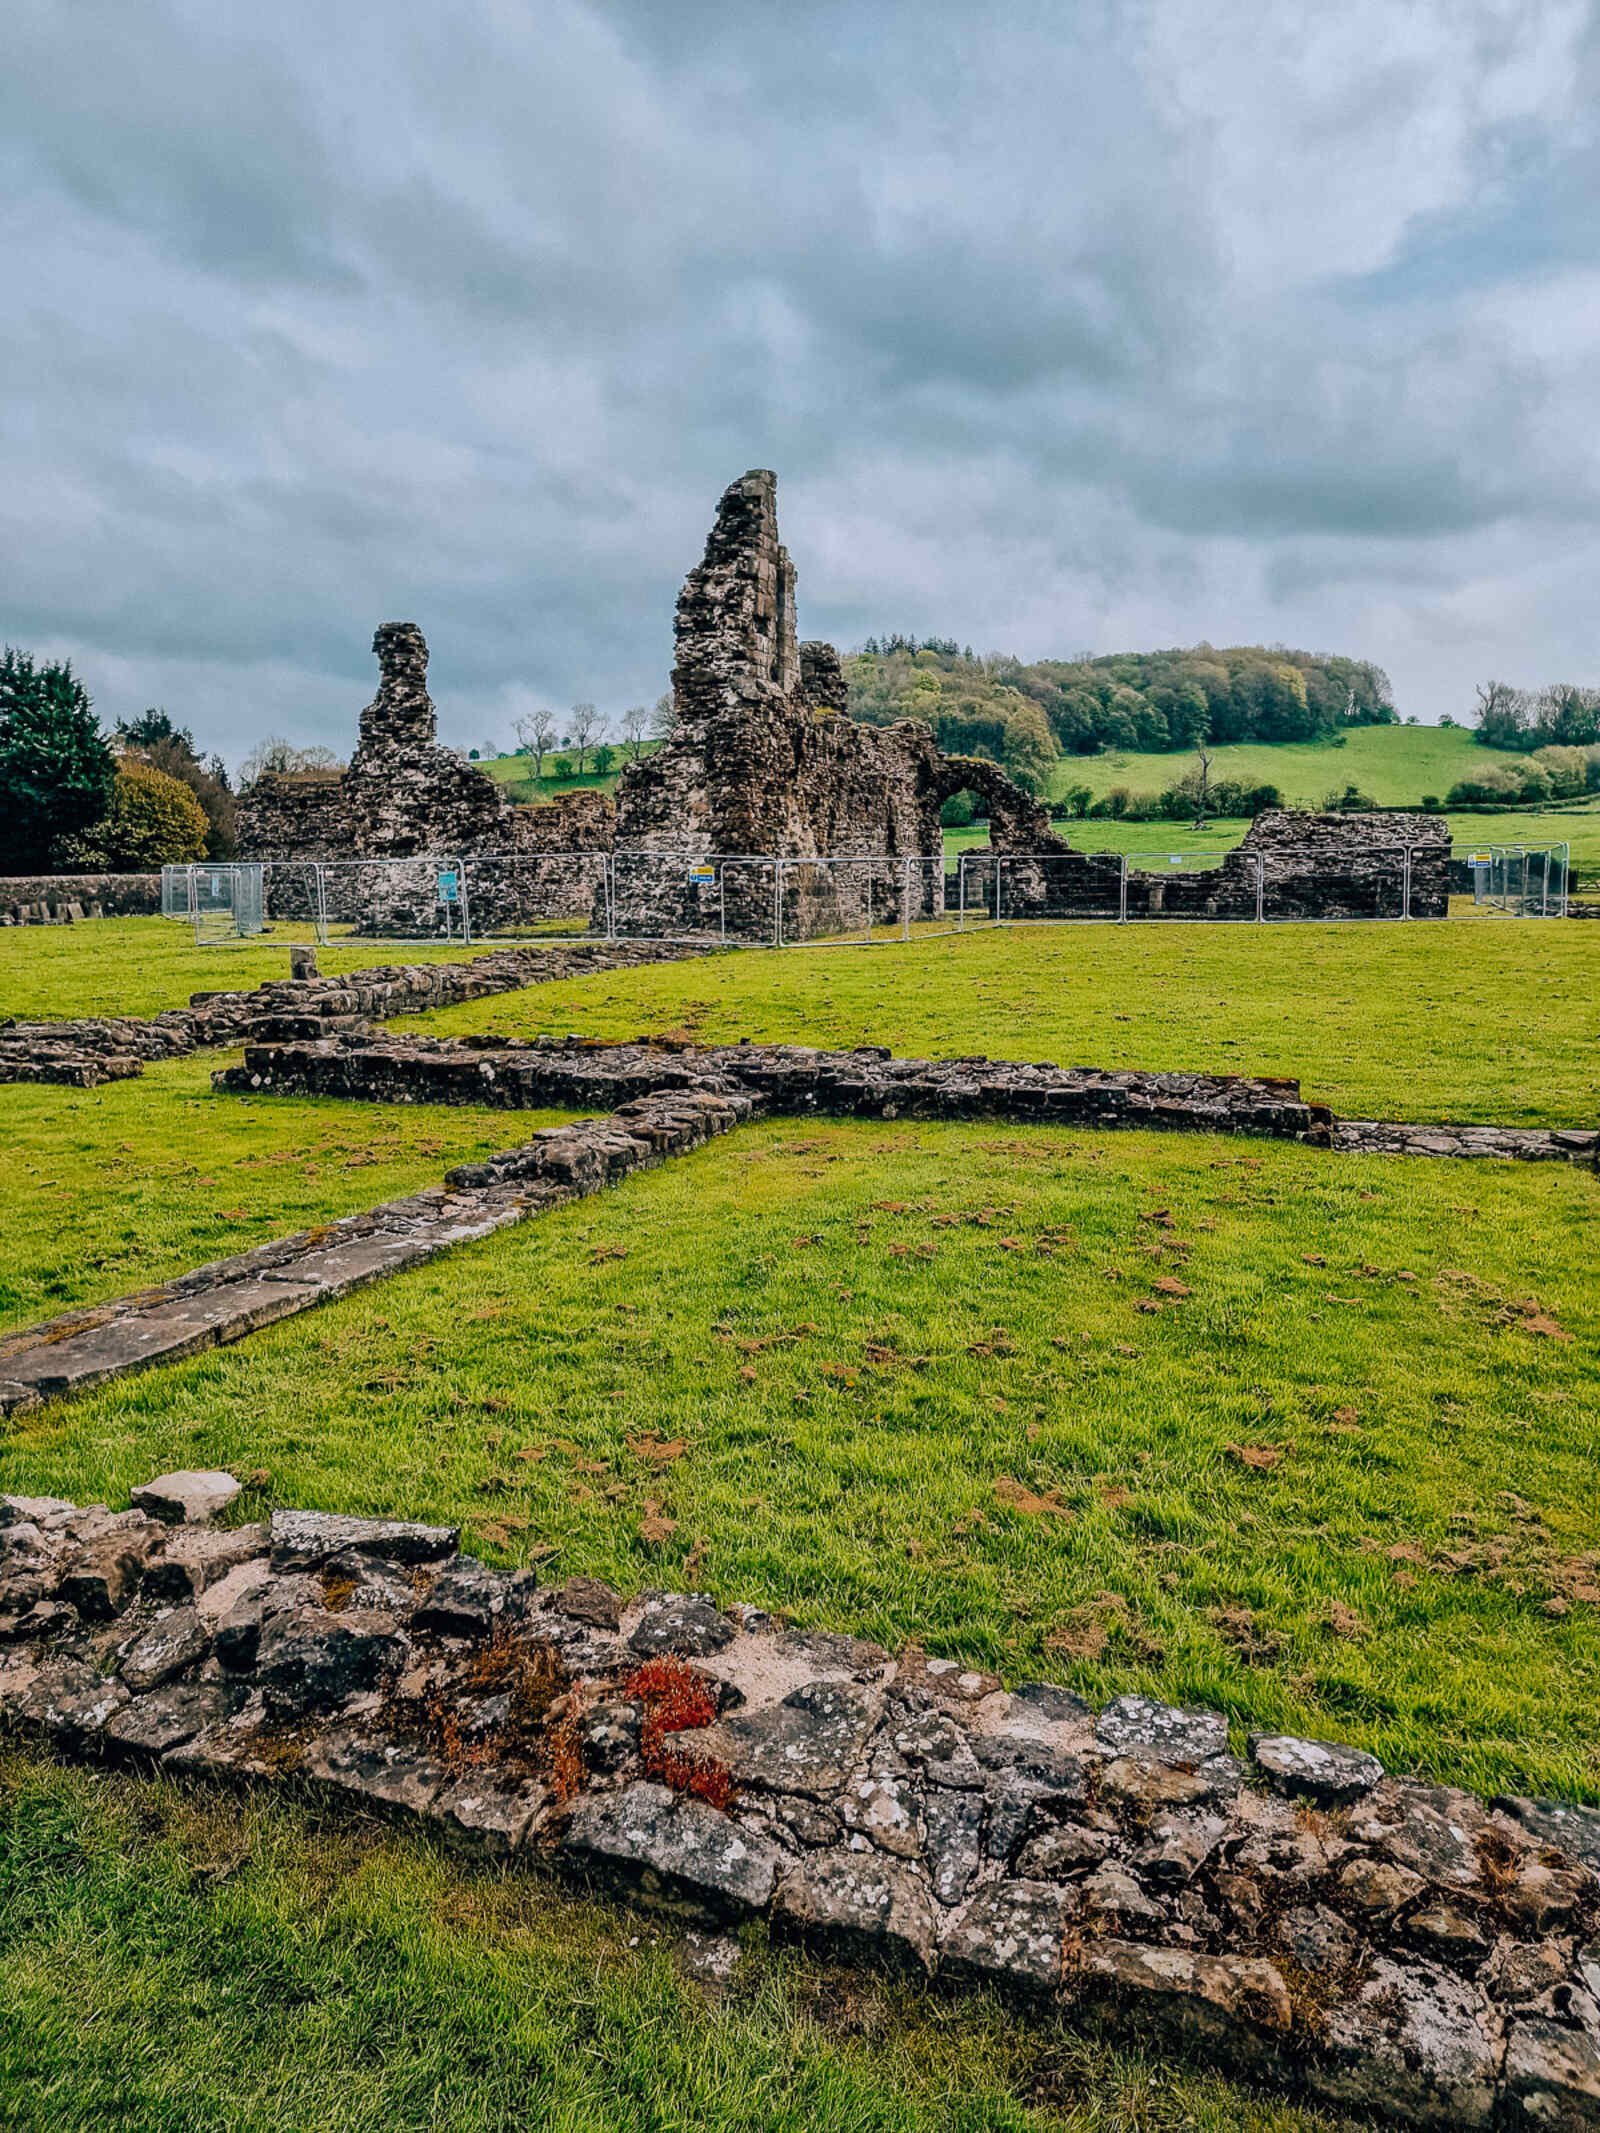 the ruins of an old foundation showing the shape of a historic abbey - Sawley Abbey